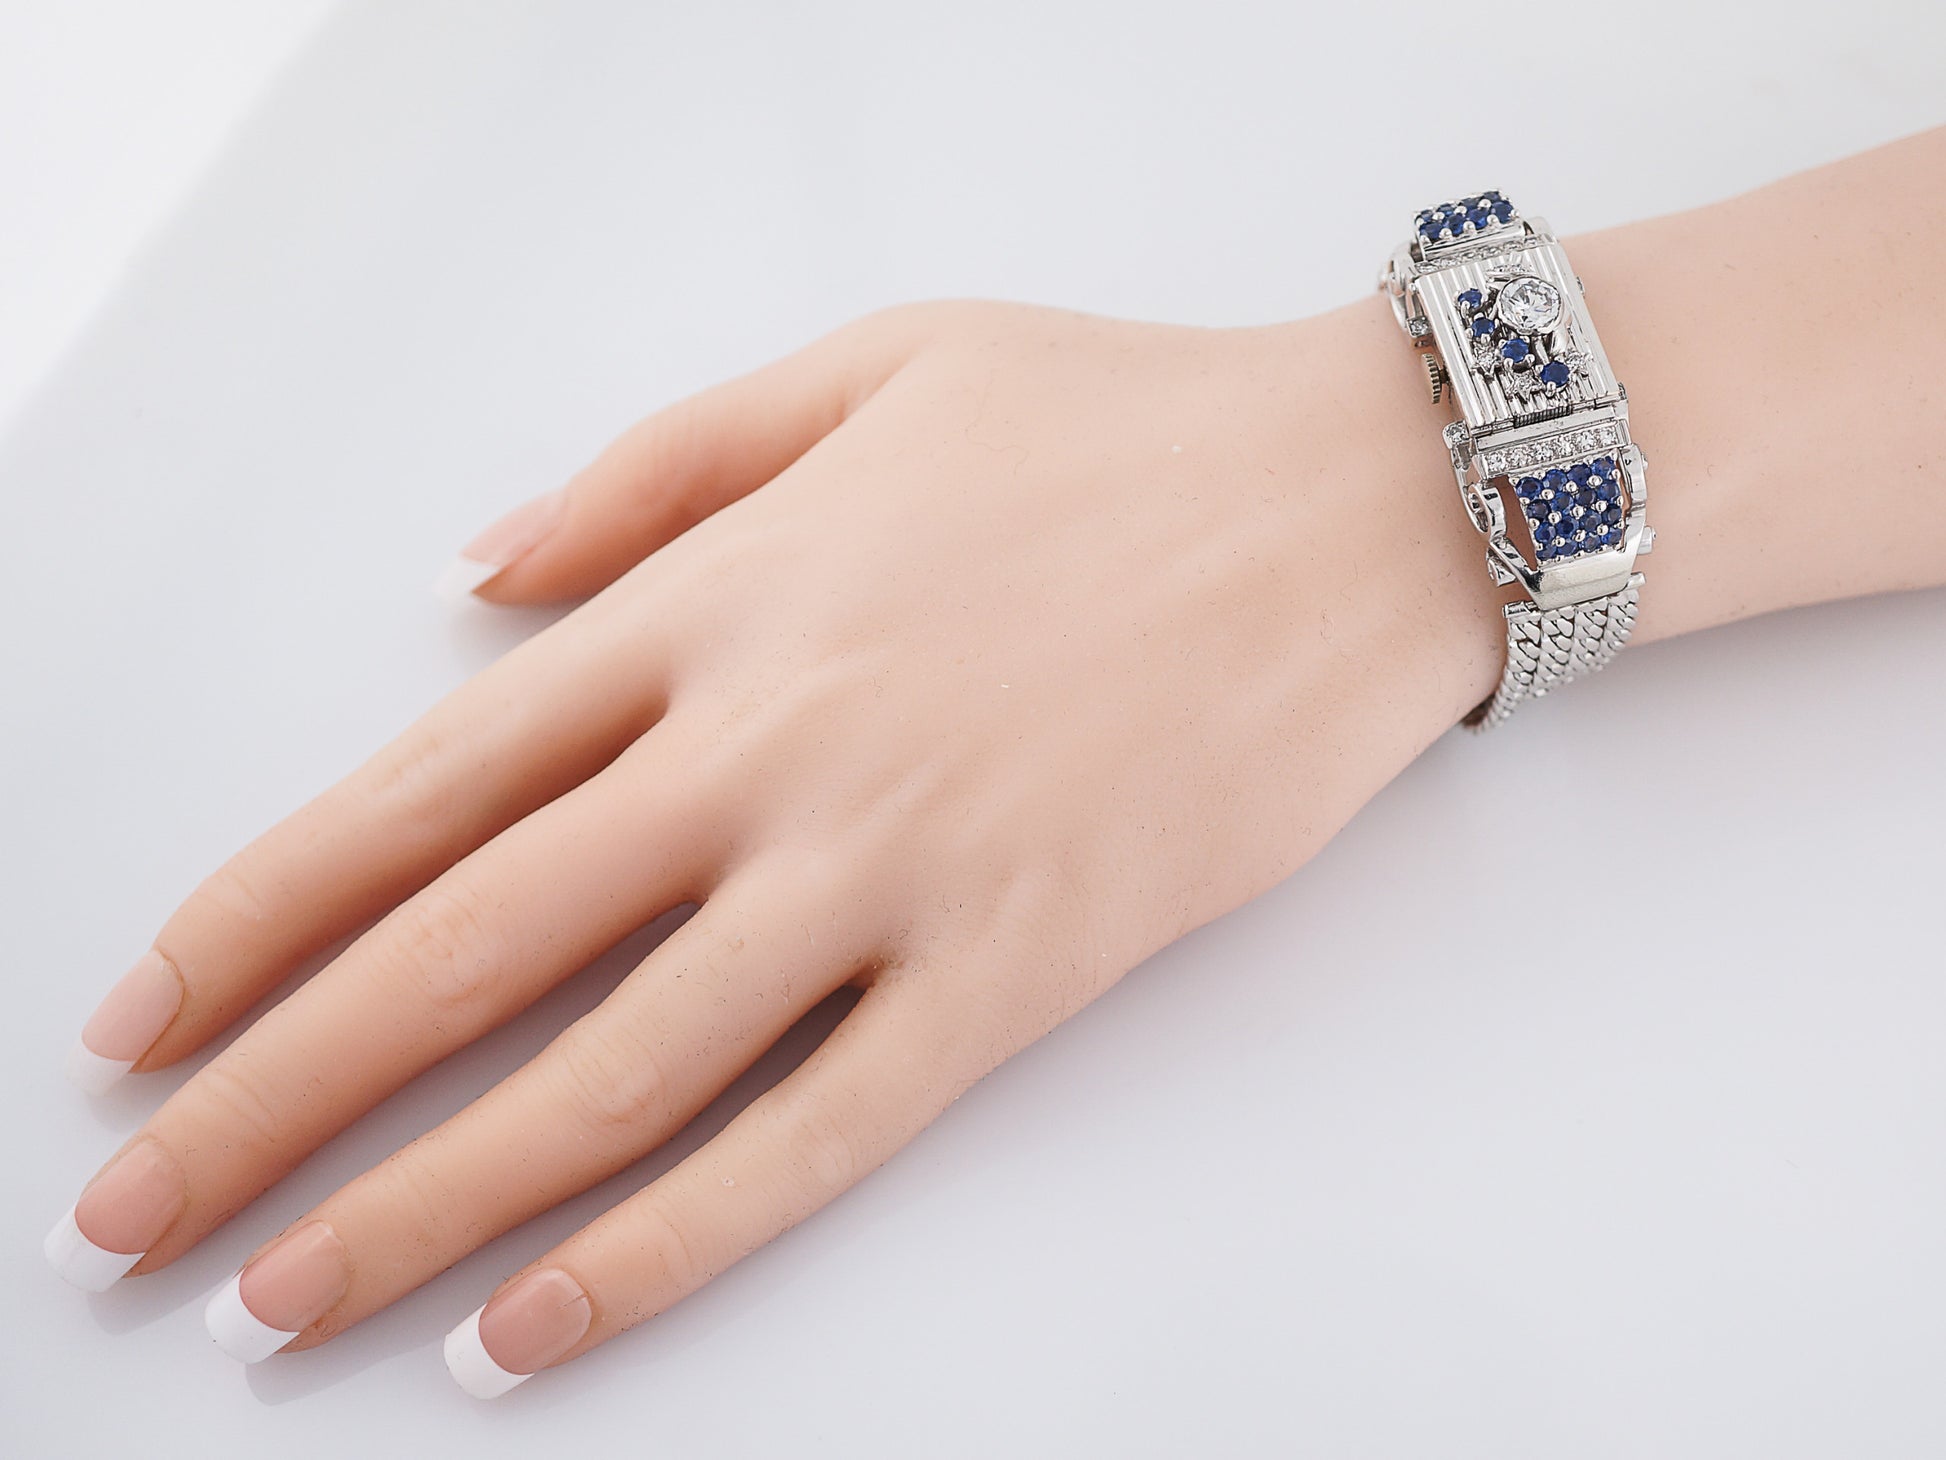 Ladies Vintage Mid-Century Watch Lucien Picard Diamond & Sapphire in 14k White Gold **sapphire count & cttw incorrect***